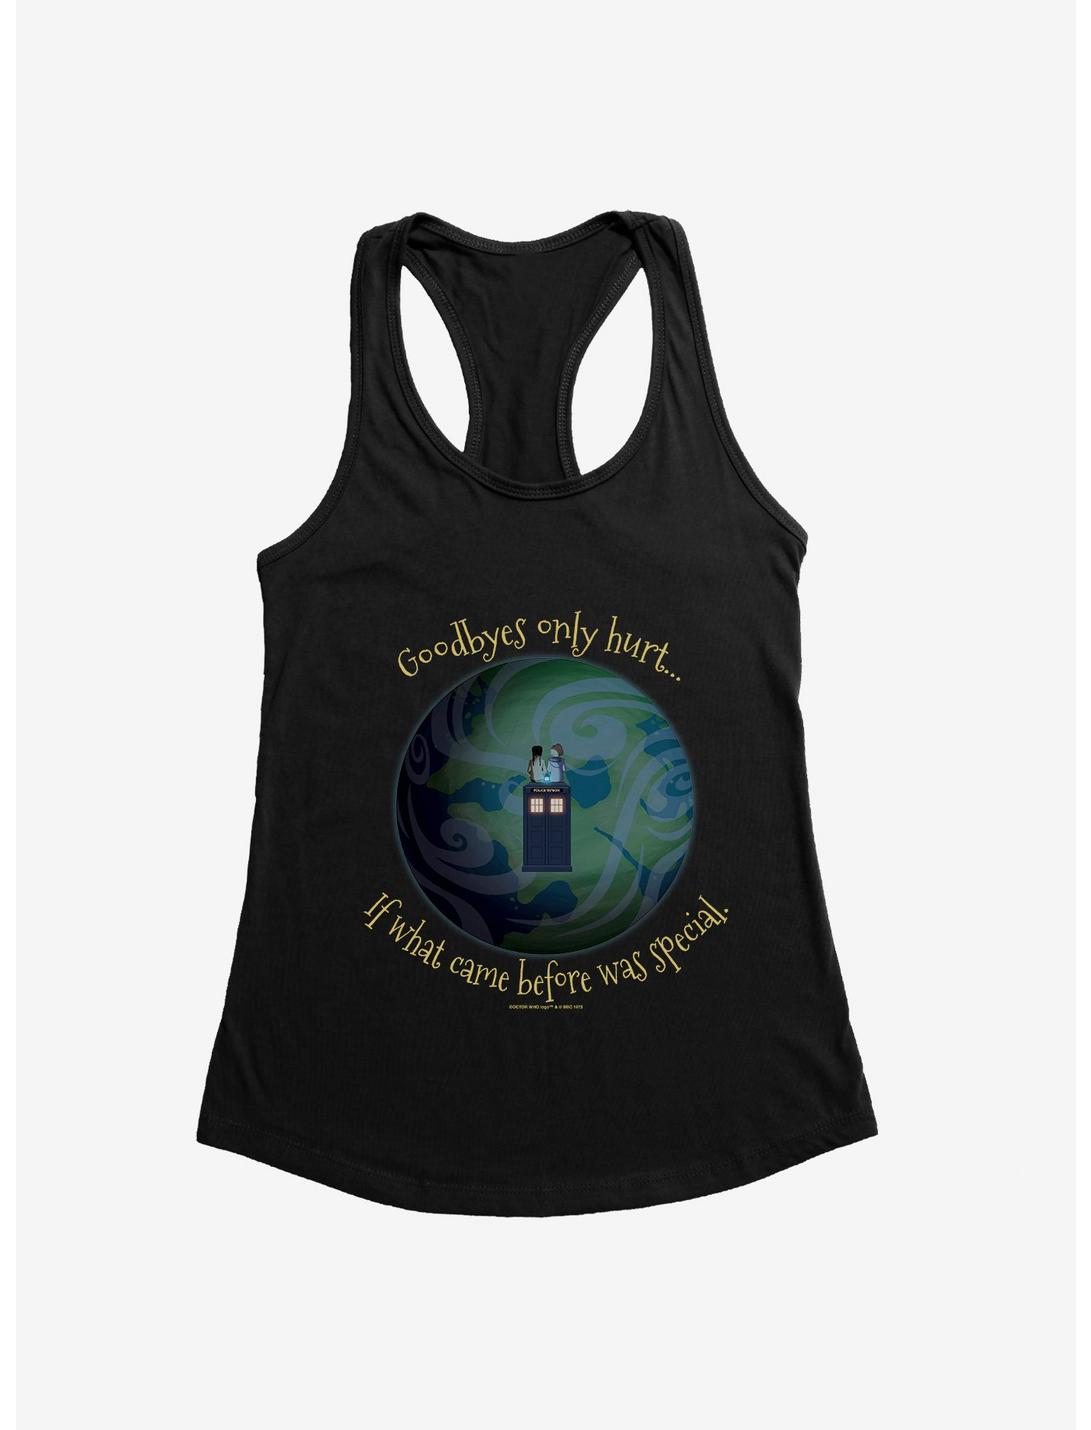 Doctor Who Goodbyes Hurt If Before Was Special Womens Tank Top, , hi-res